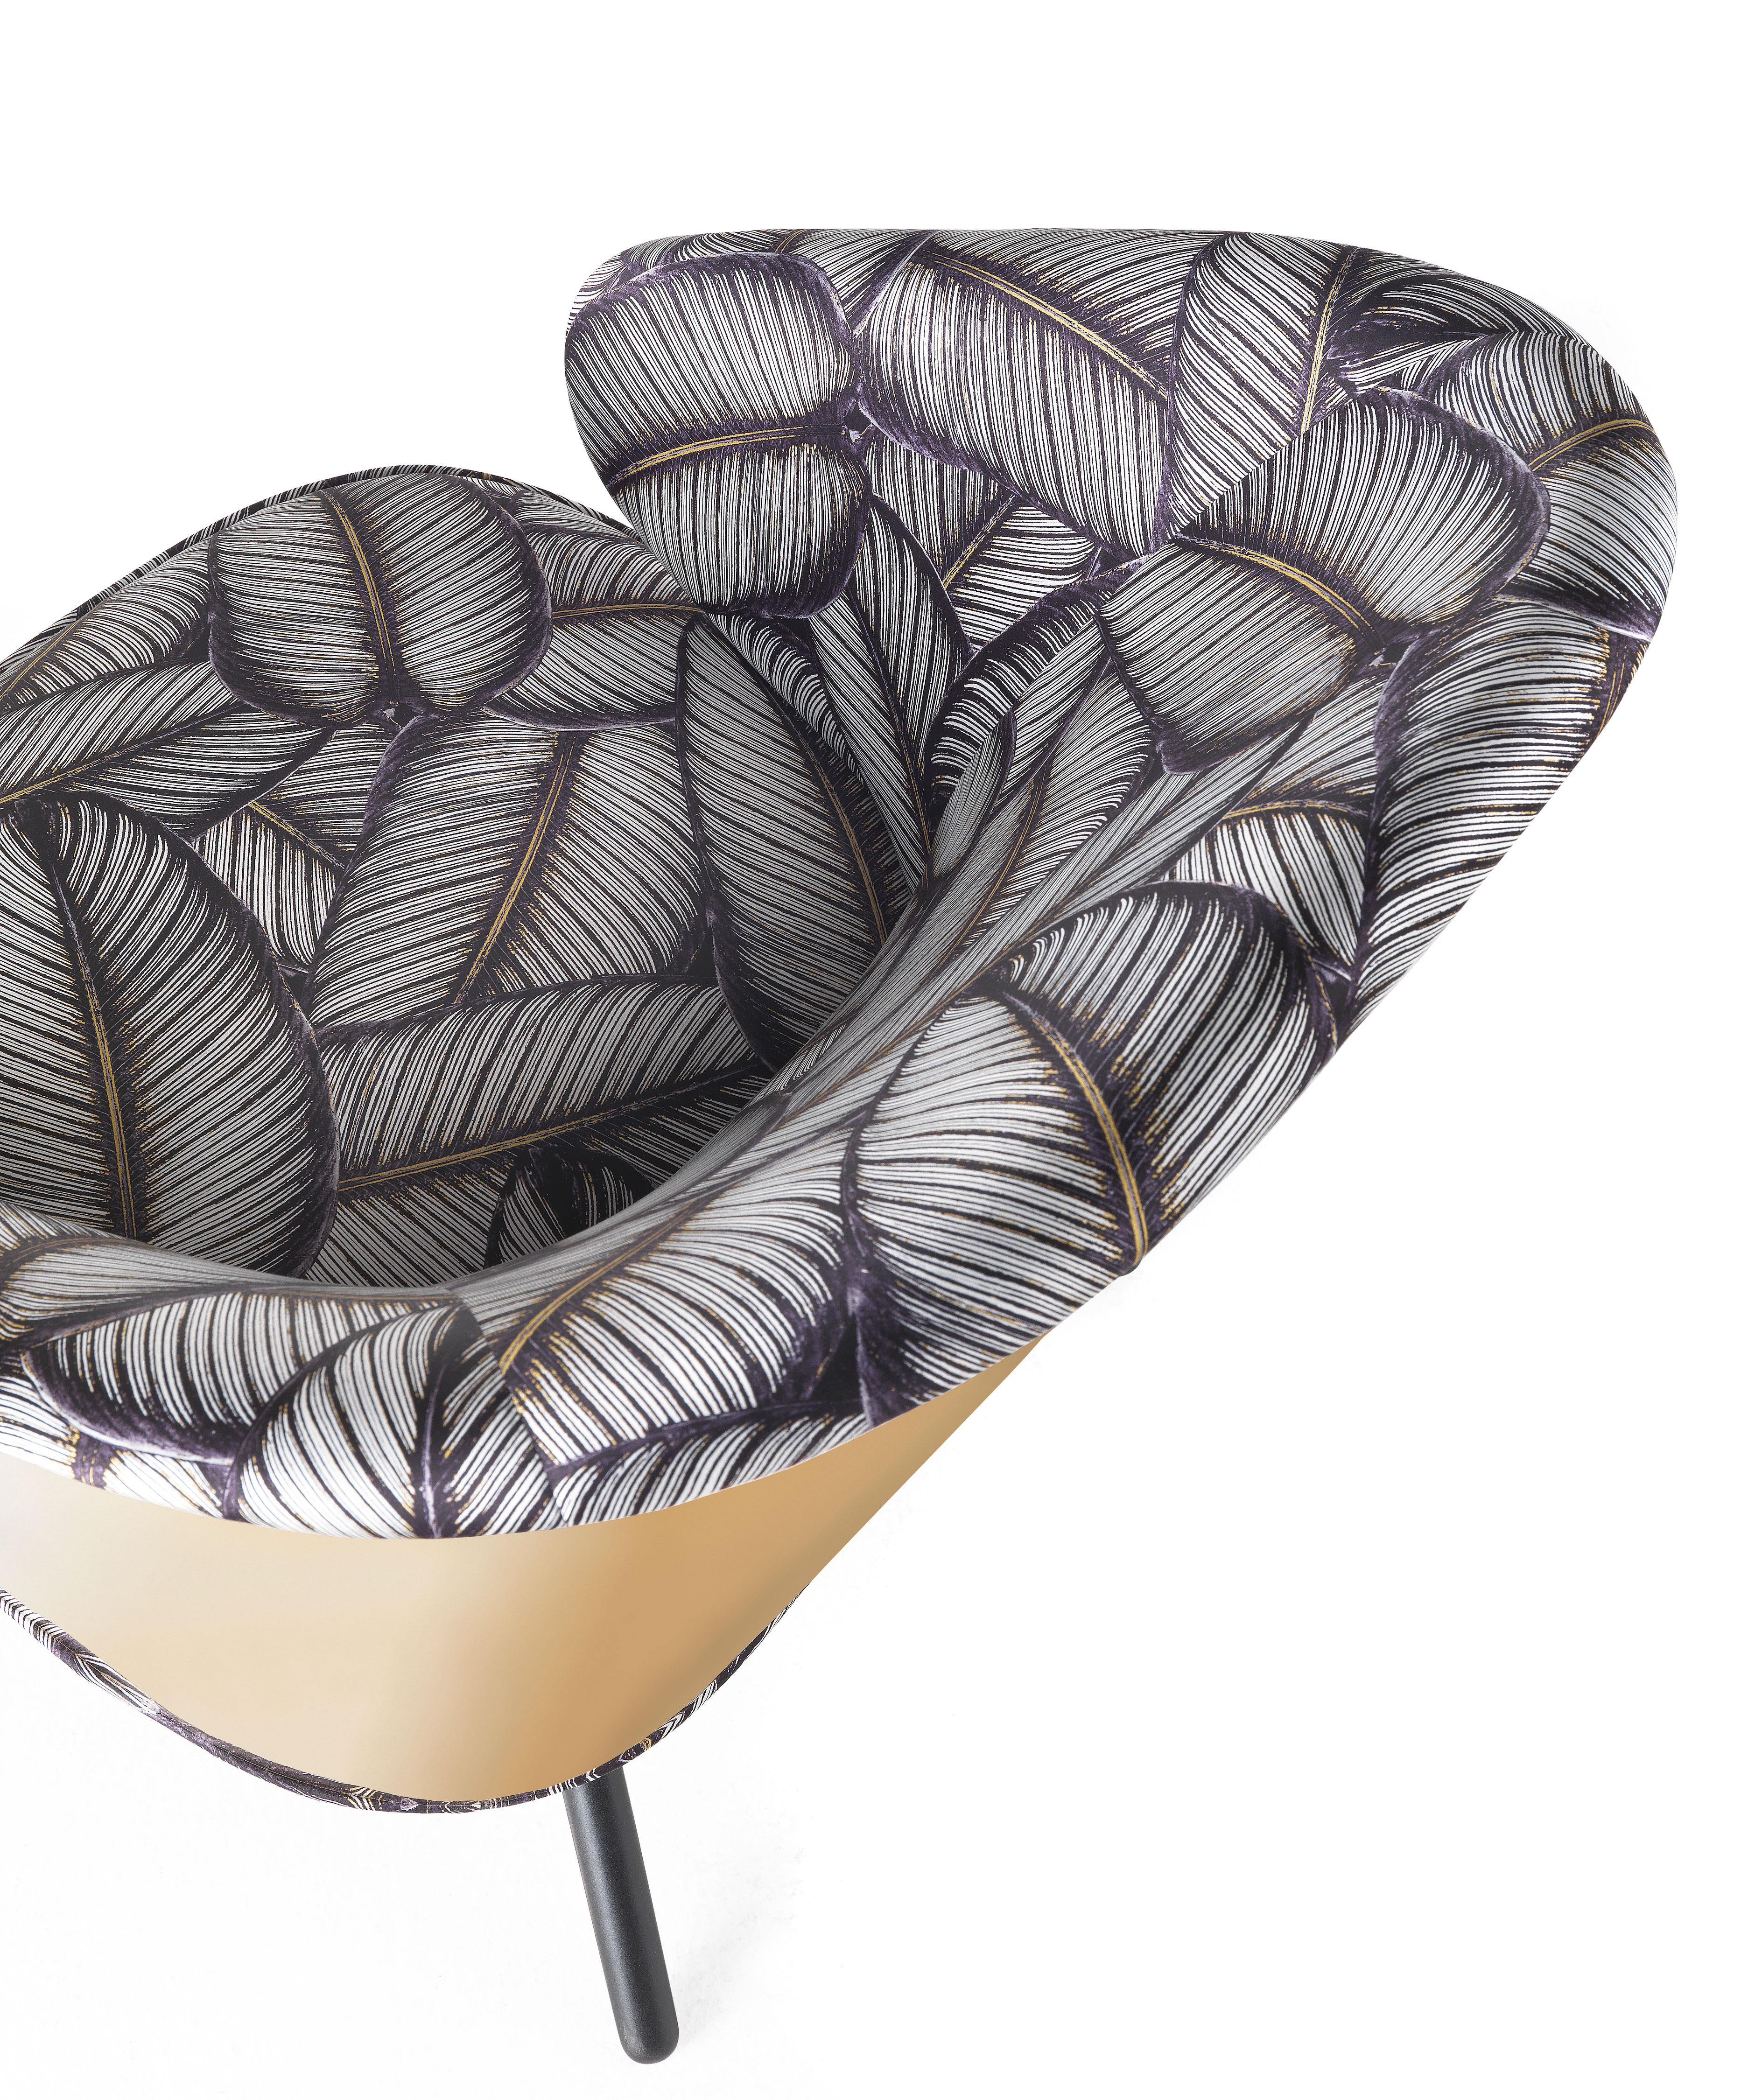 21st Century Key West Armchair in Silk by Roberto Cavalli Home Interiors  In New Condition For Sale In Cantù, Lombardia